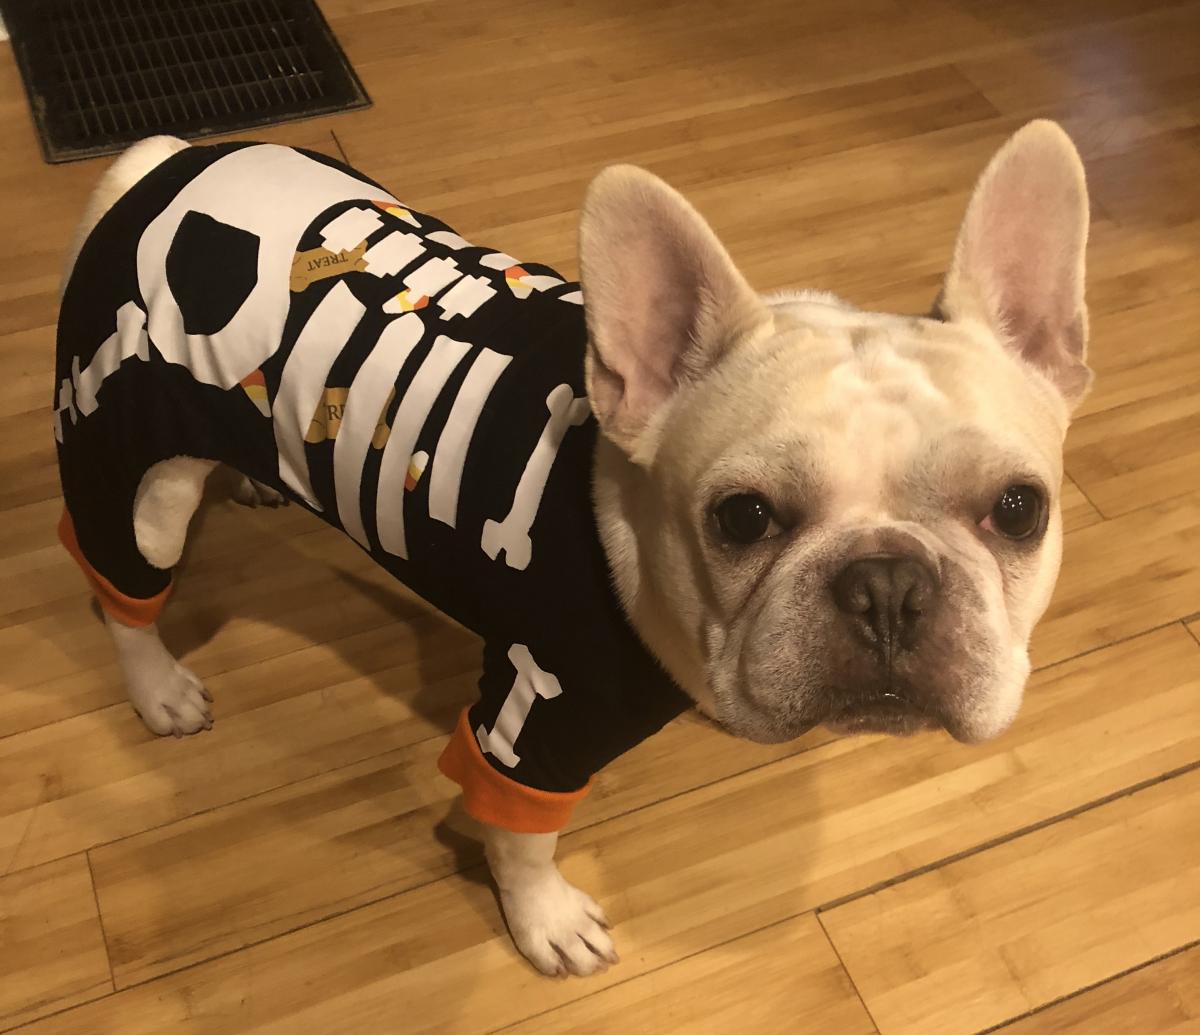 Happy Halloween from the worst pipetter in the lab, Nacho (Cooperstone), Oct 2018